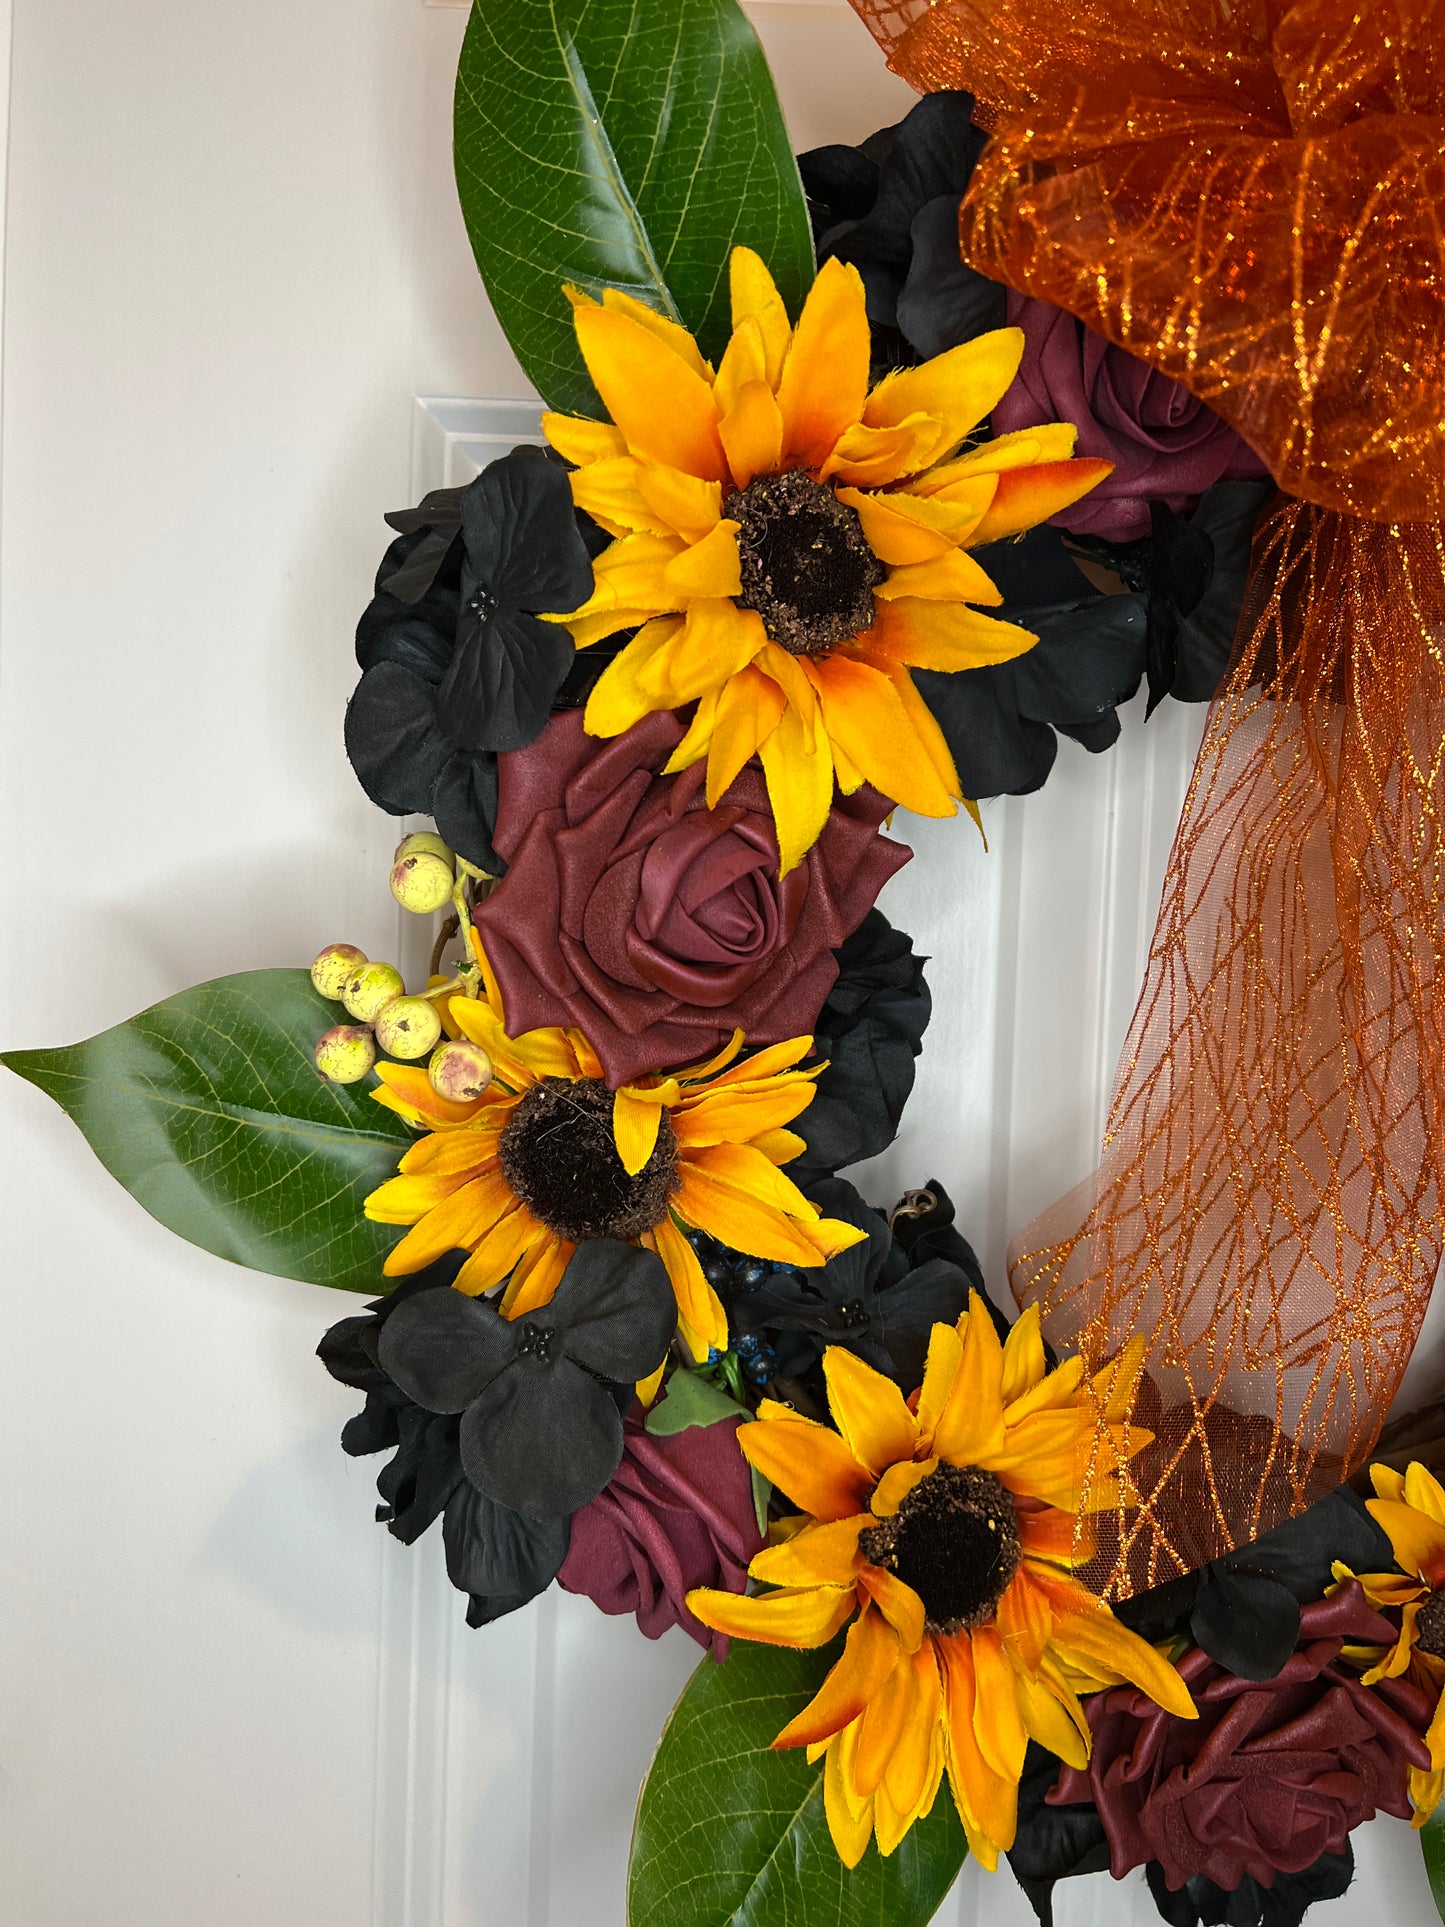 16" Sunflowers and Roses Wreath